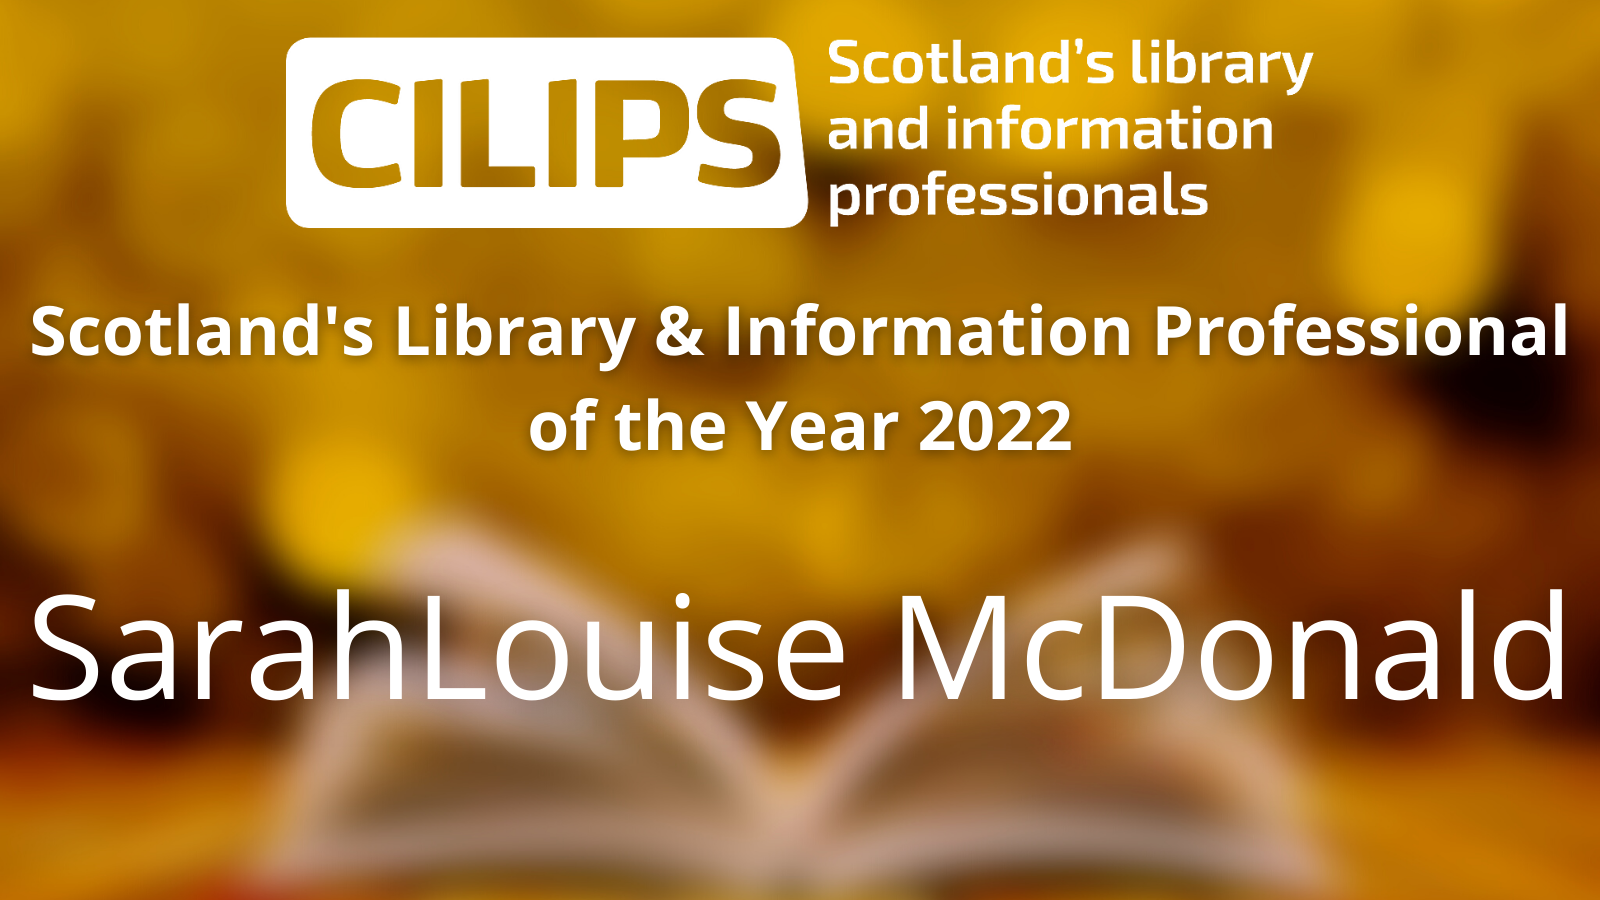 The Scotland's Library & Information Professional of the Year 2022 logo, with white text in front of a gold library book background, reading SarahLouise McDonald.